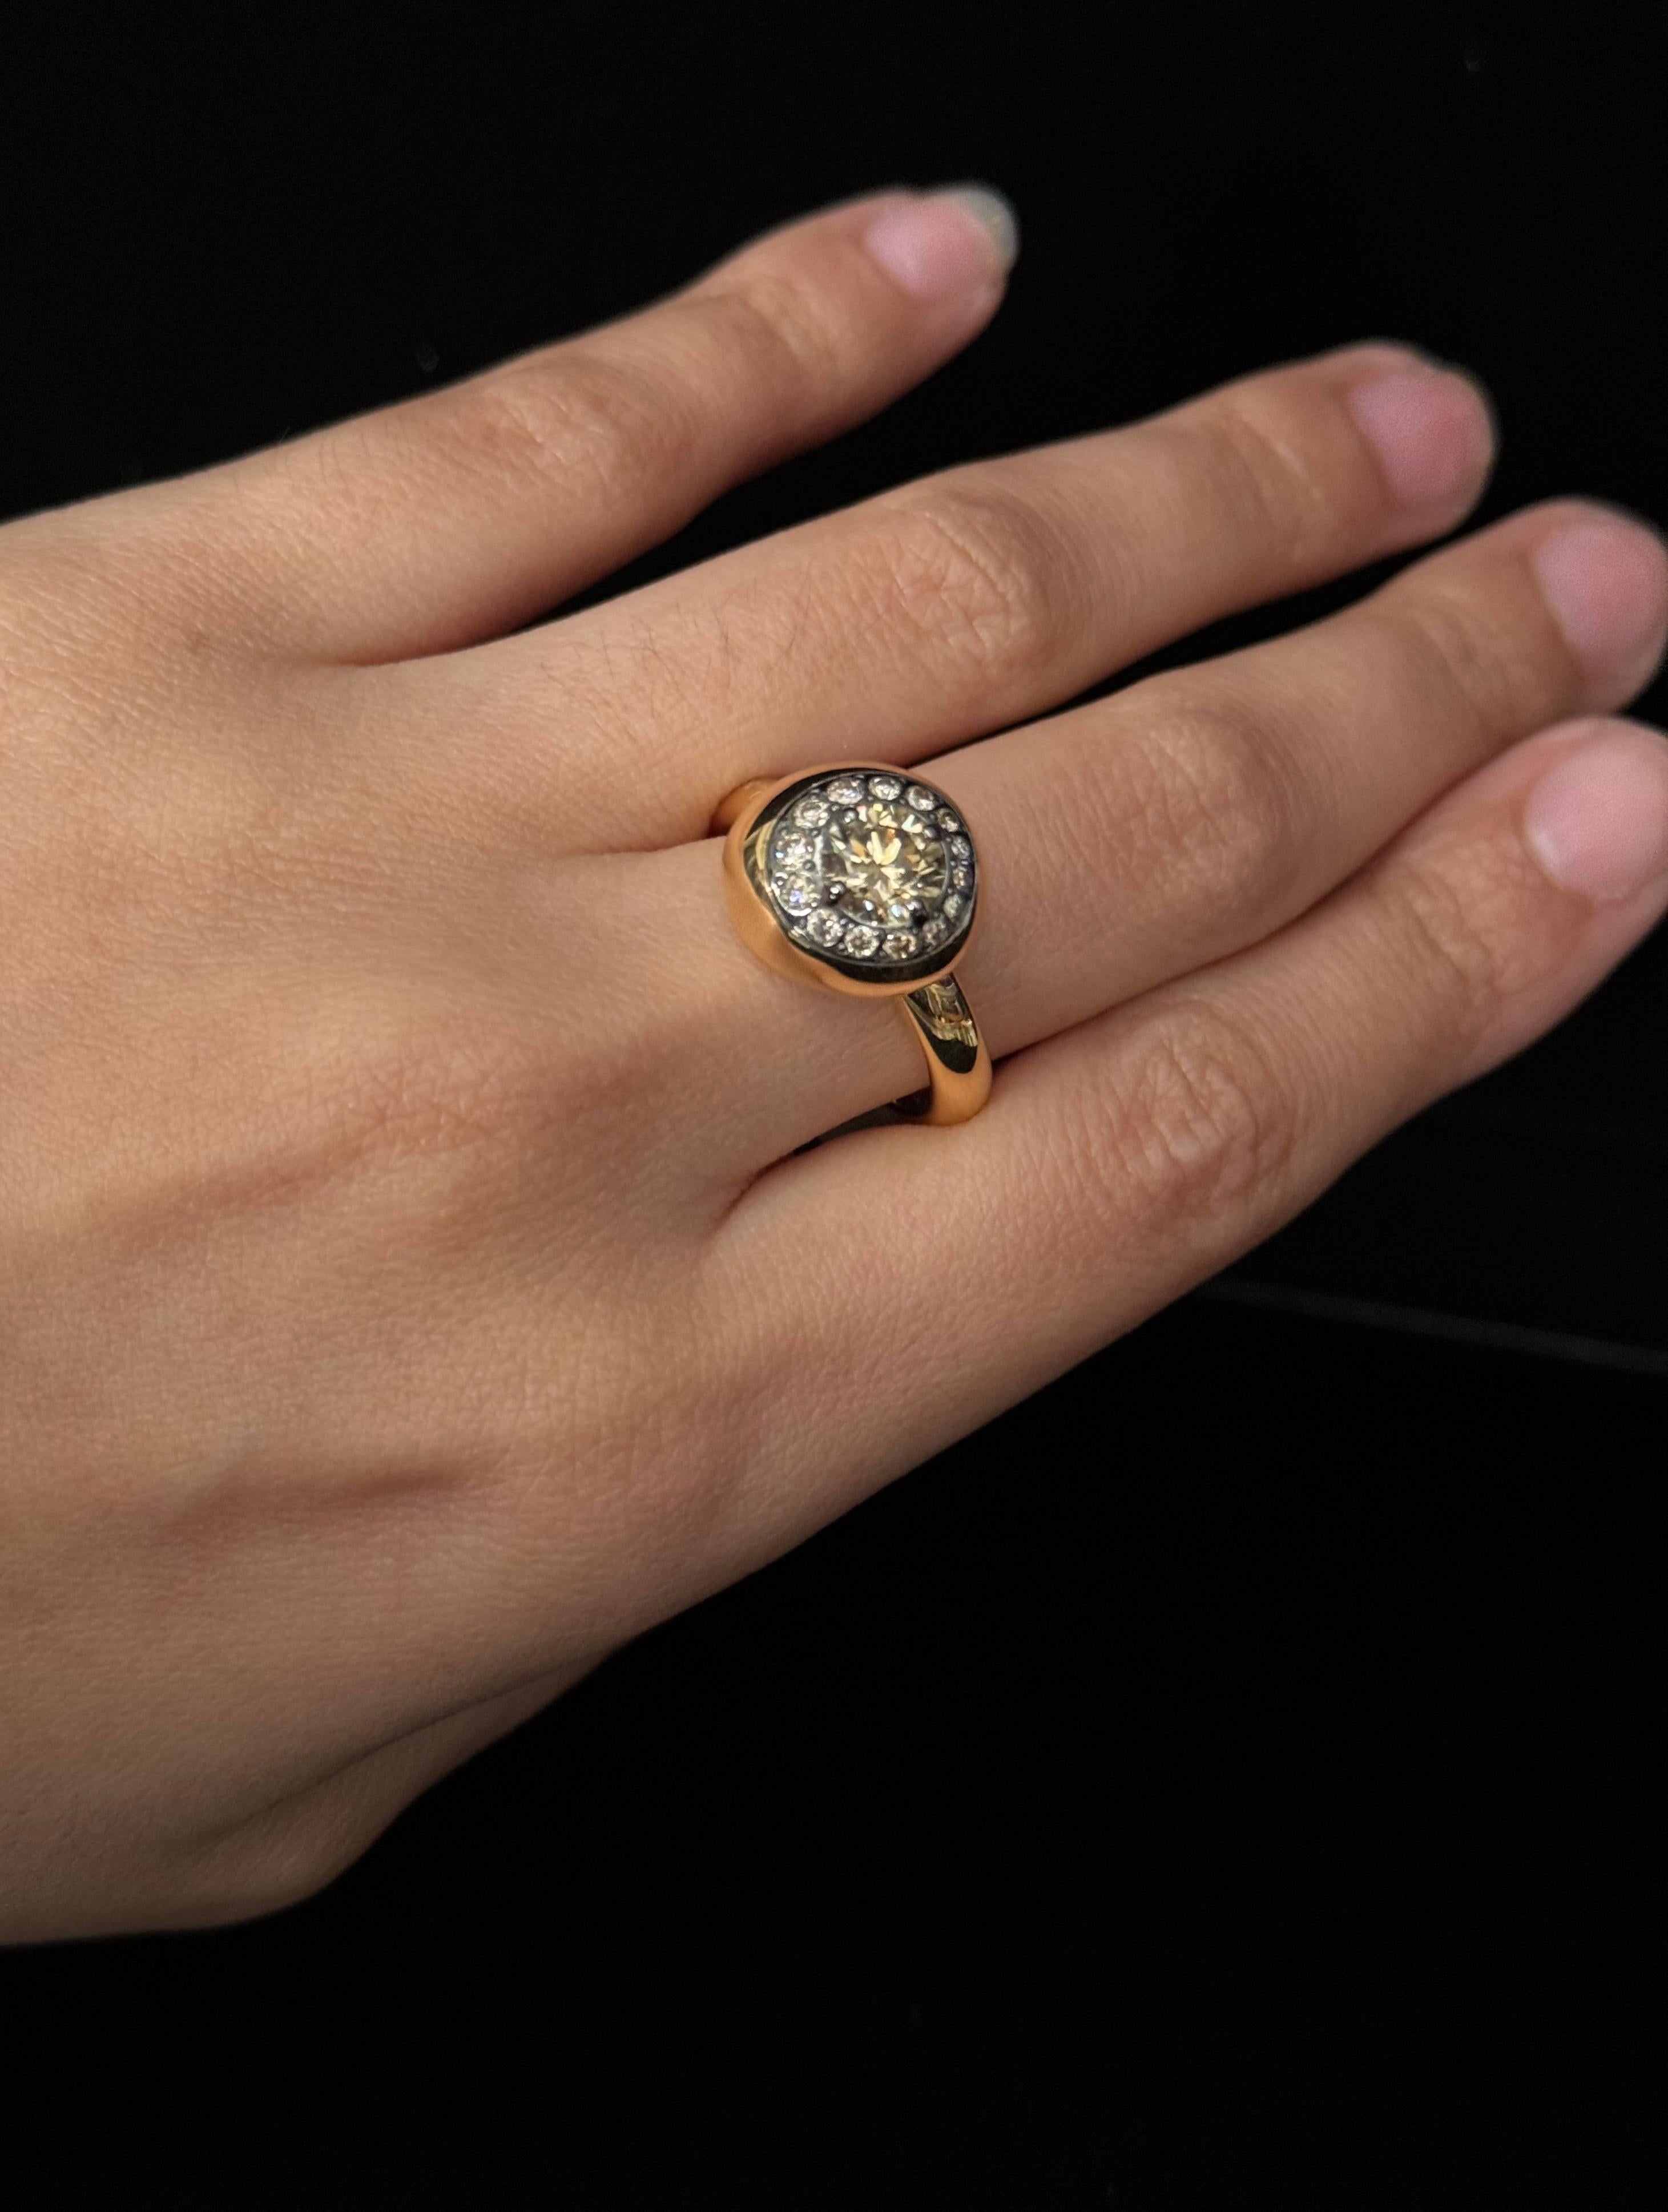 This radiant ring features a brown centered diamond surrounded by a dazzling brown diamond pave. These diamonds are discreetly set into a circular Nuvola style setting on a ring that boasts undoubted luxury and warmth. Created in brightly polished